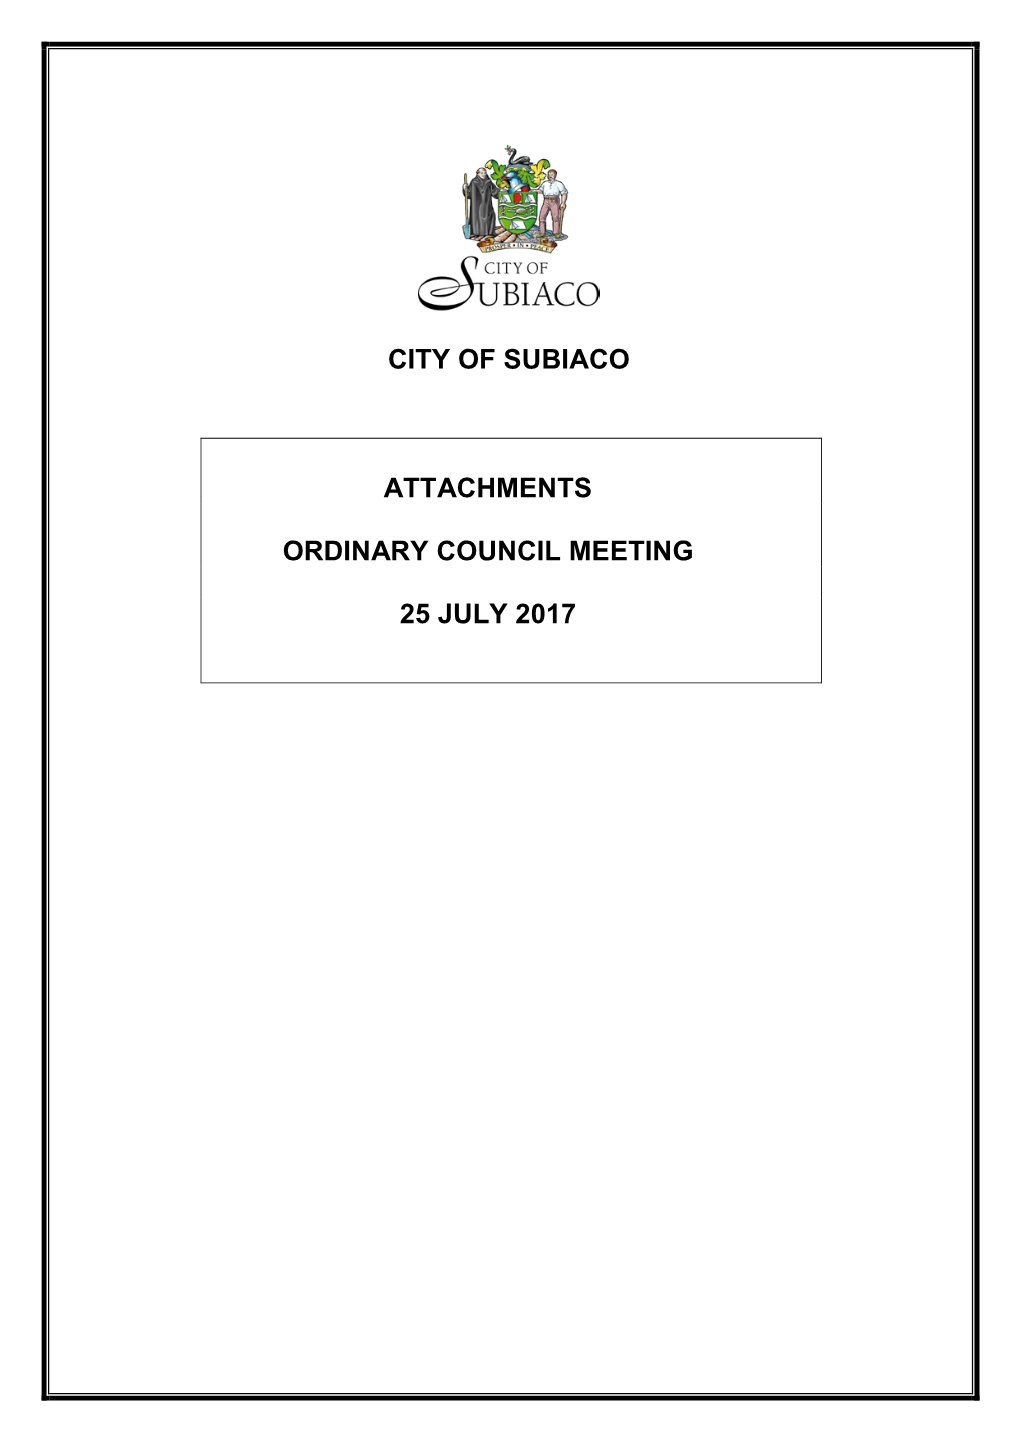 City of Subiaco Attachments Ordinary Council Meeting